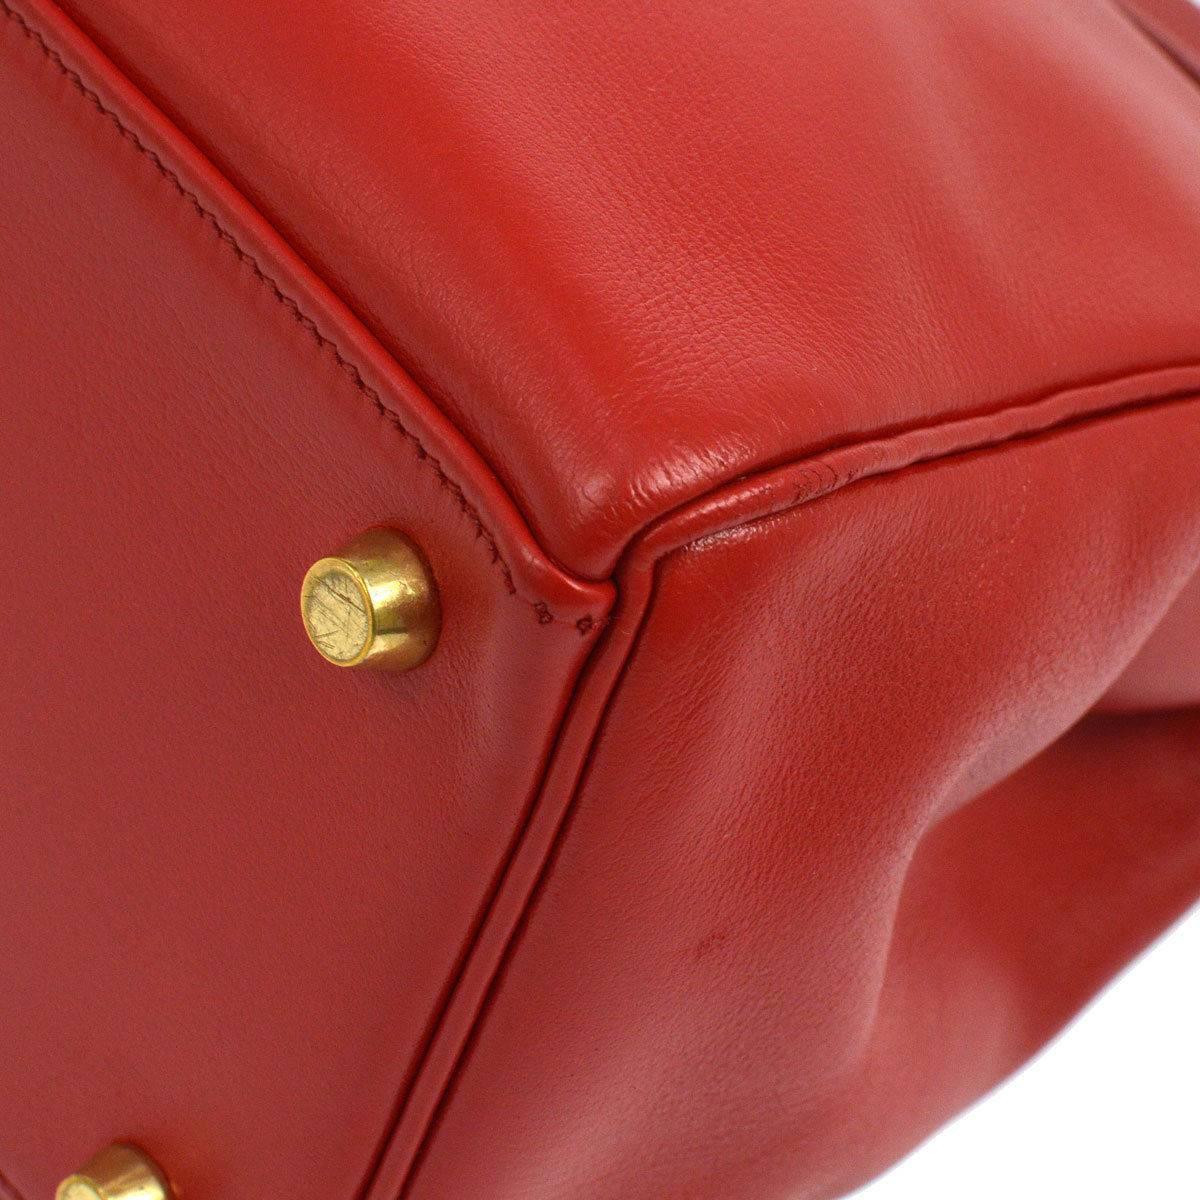 Hermes Kelly 32 Rouge Red Leather Evening Top Handle Satchel Flap Bag in Box 1